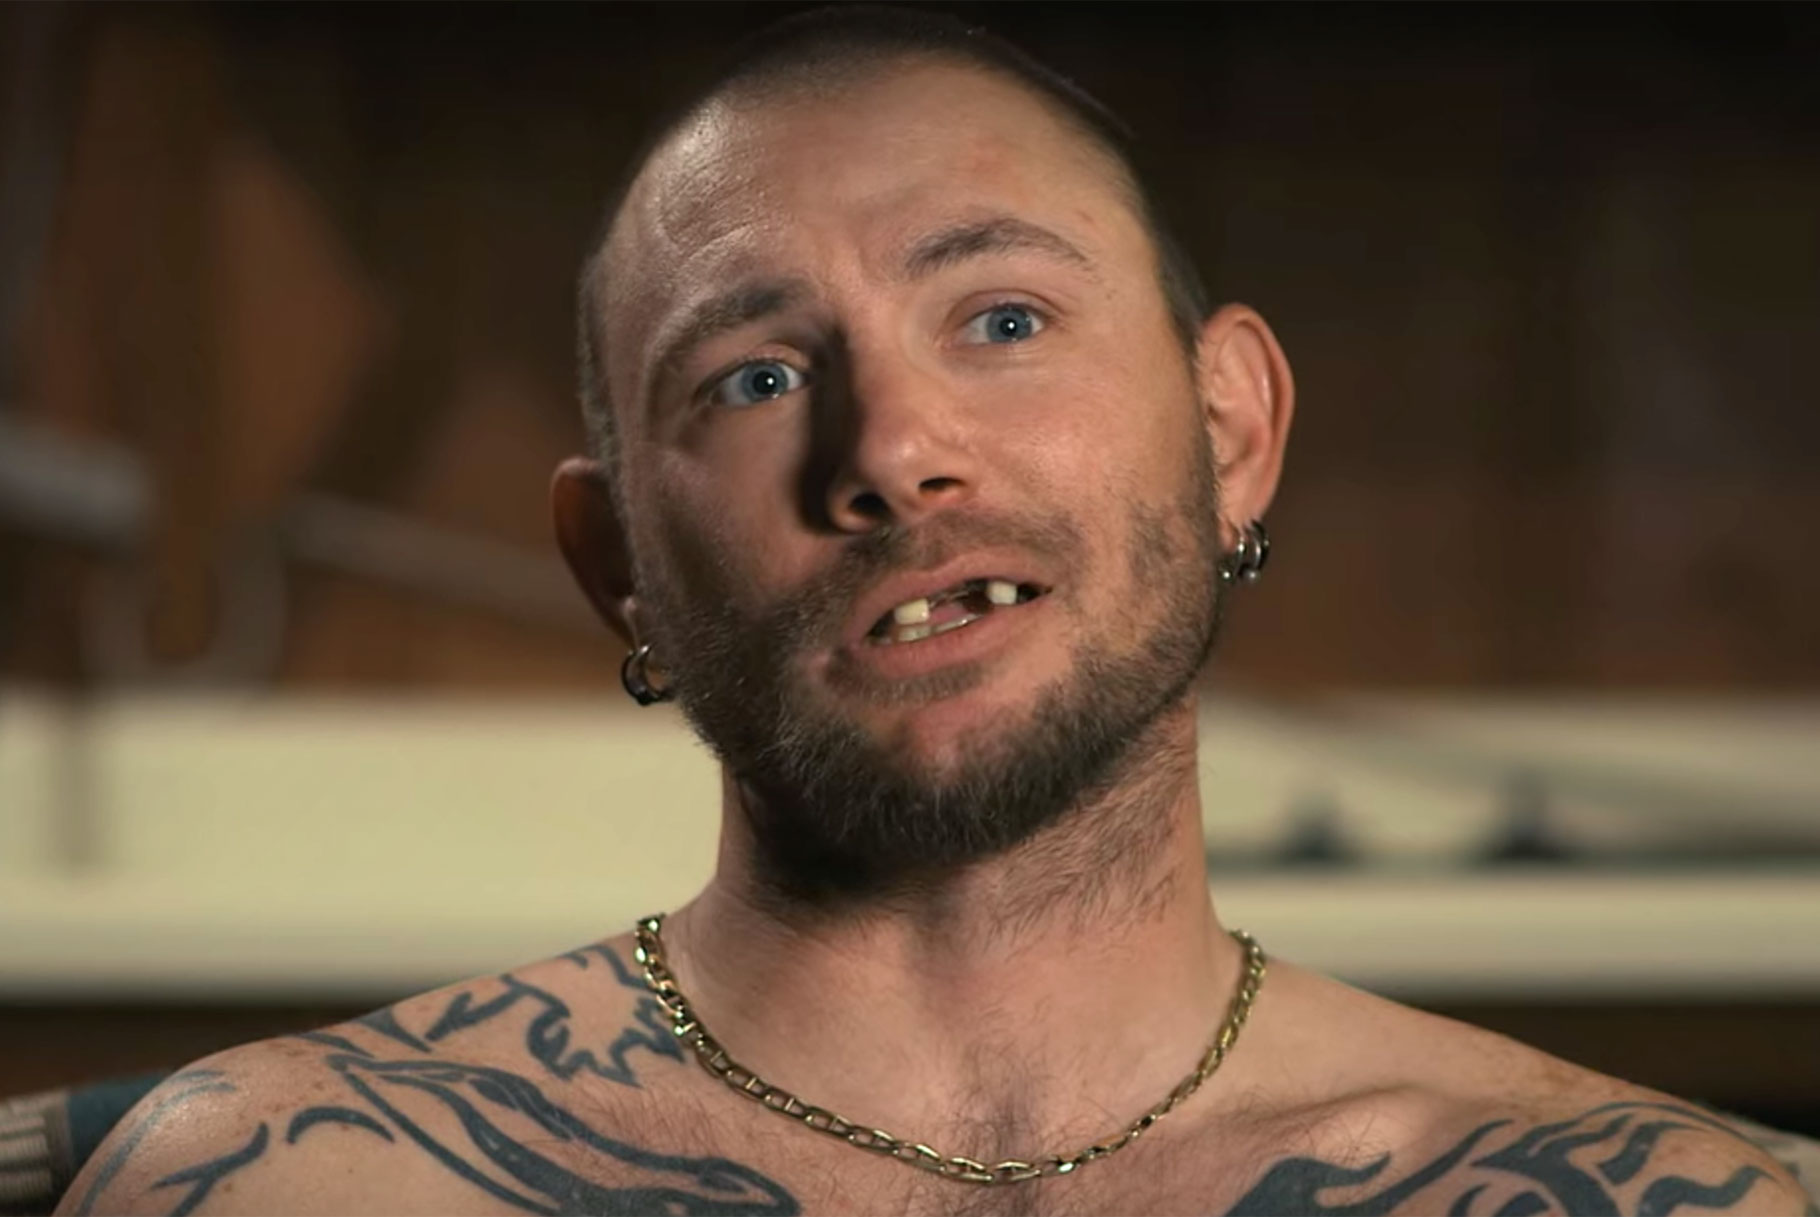 John Finlay in Netflix documentary Tiger King. A close-up interview with the shirtless Finlay reveals his heavy chest tattoos, gold chain, and missing teeth.